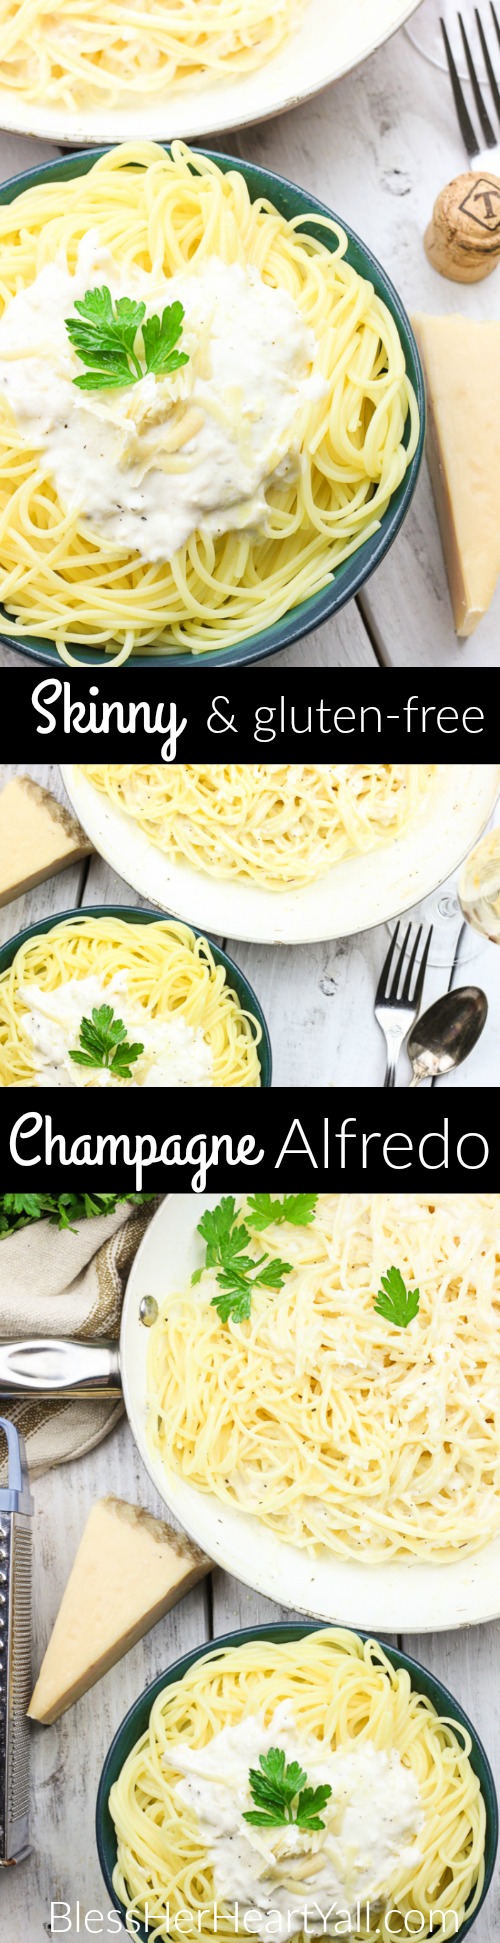 This Skinny Champagne Alfredo recipe is amazing and quick to make! Instead of those heavy unhealthy creams, healthy greek yogurt is used! And if we needed a reason to use up extra New Year's Eve champagne, here it is! It is used in lieu of chicken broth or white wine in the typical alfredo sauce! Cream, healthy, fun deliciousness! www.blessherheartyall.com